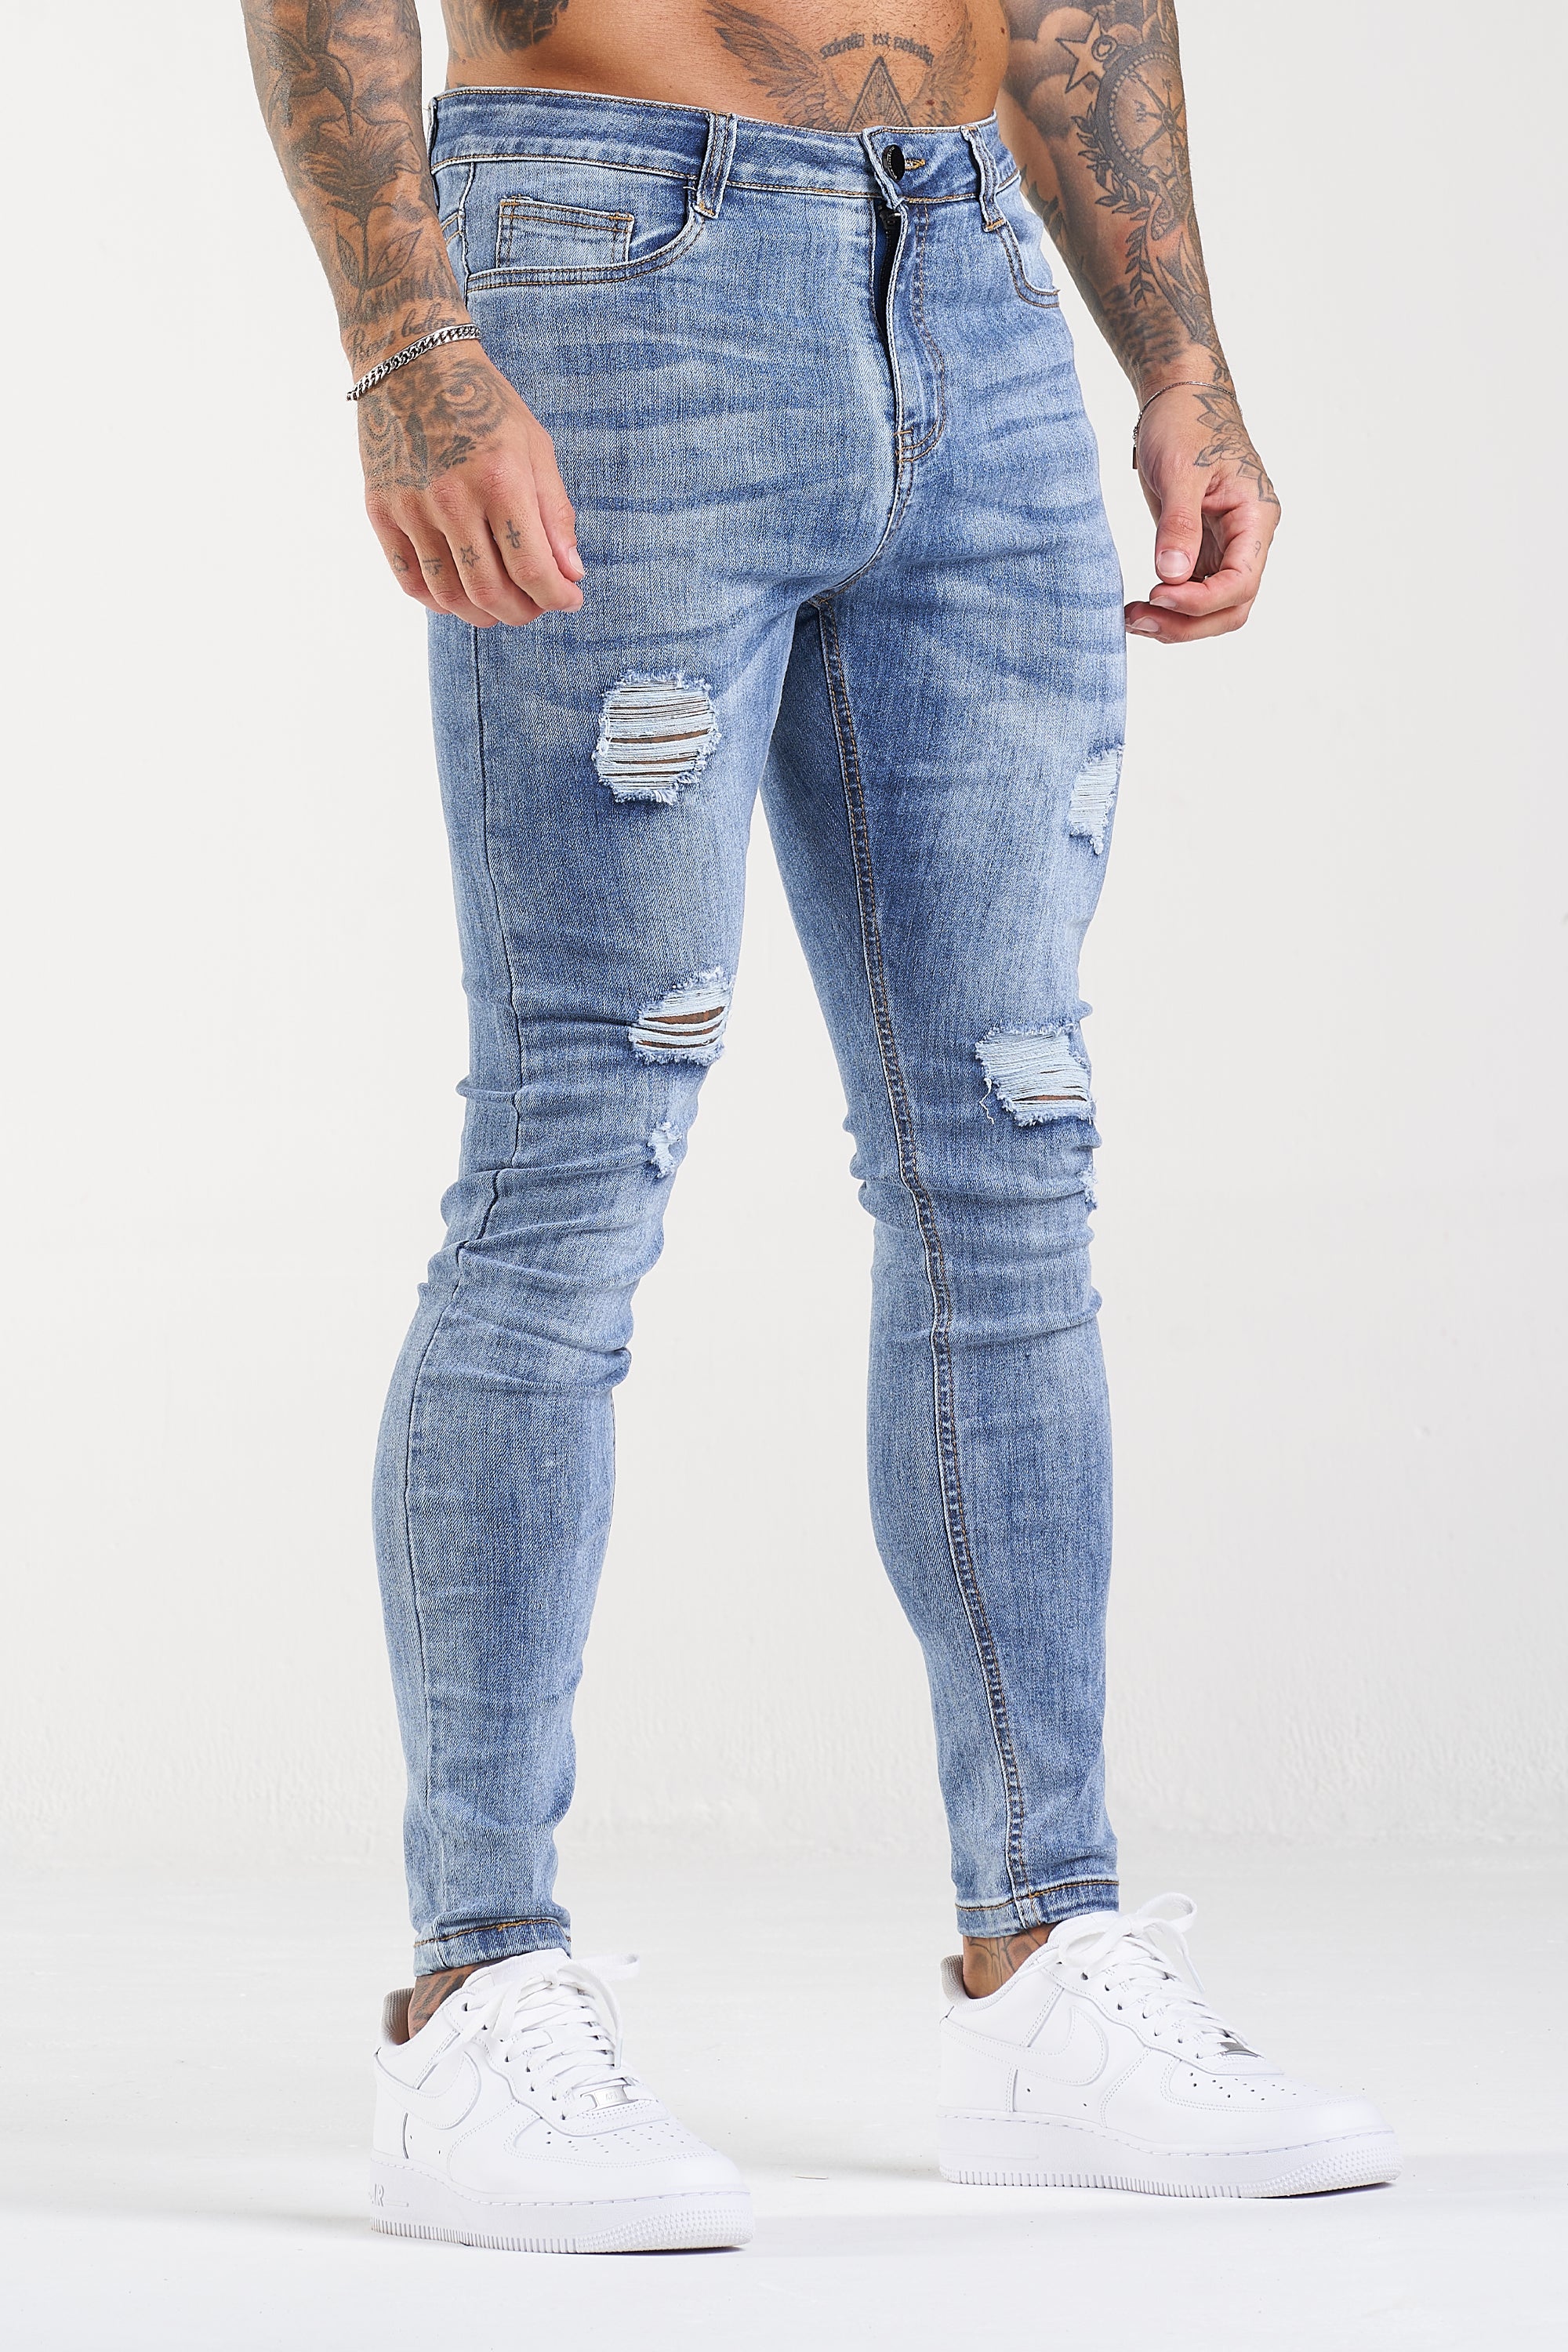 THE SAVAGE JEANS - PALE BLUE - ICON. AMSTERDAM